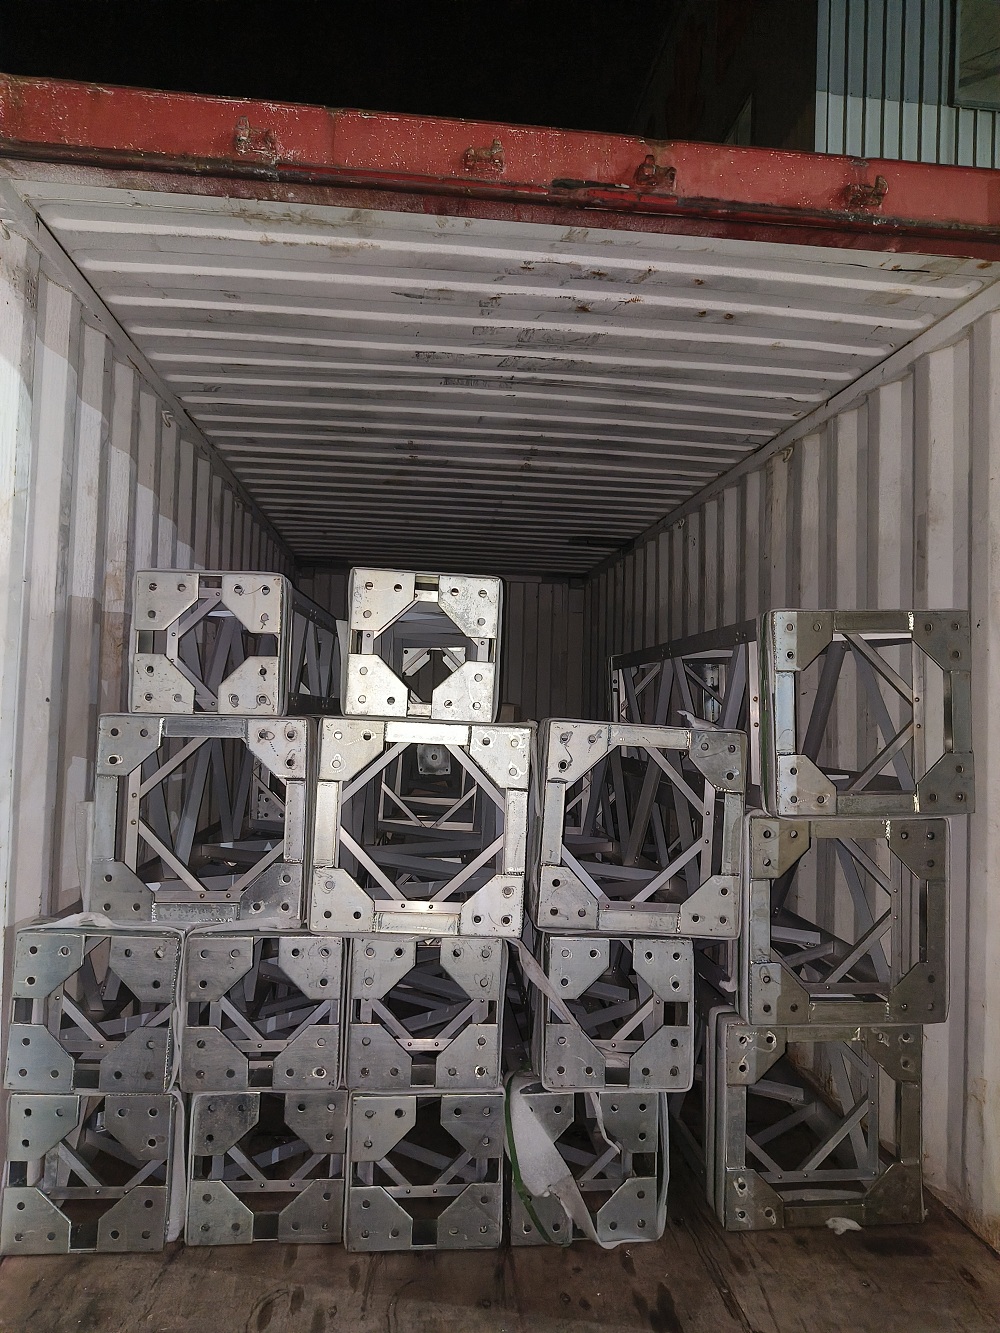 Aluminum alloy gin poles and motorised winches are exported